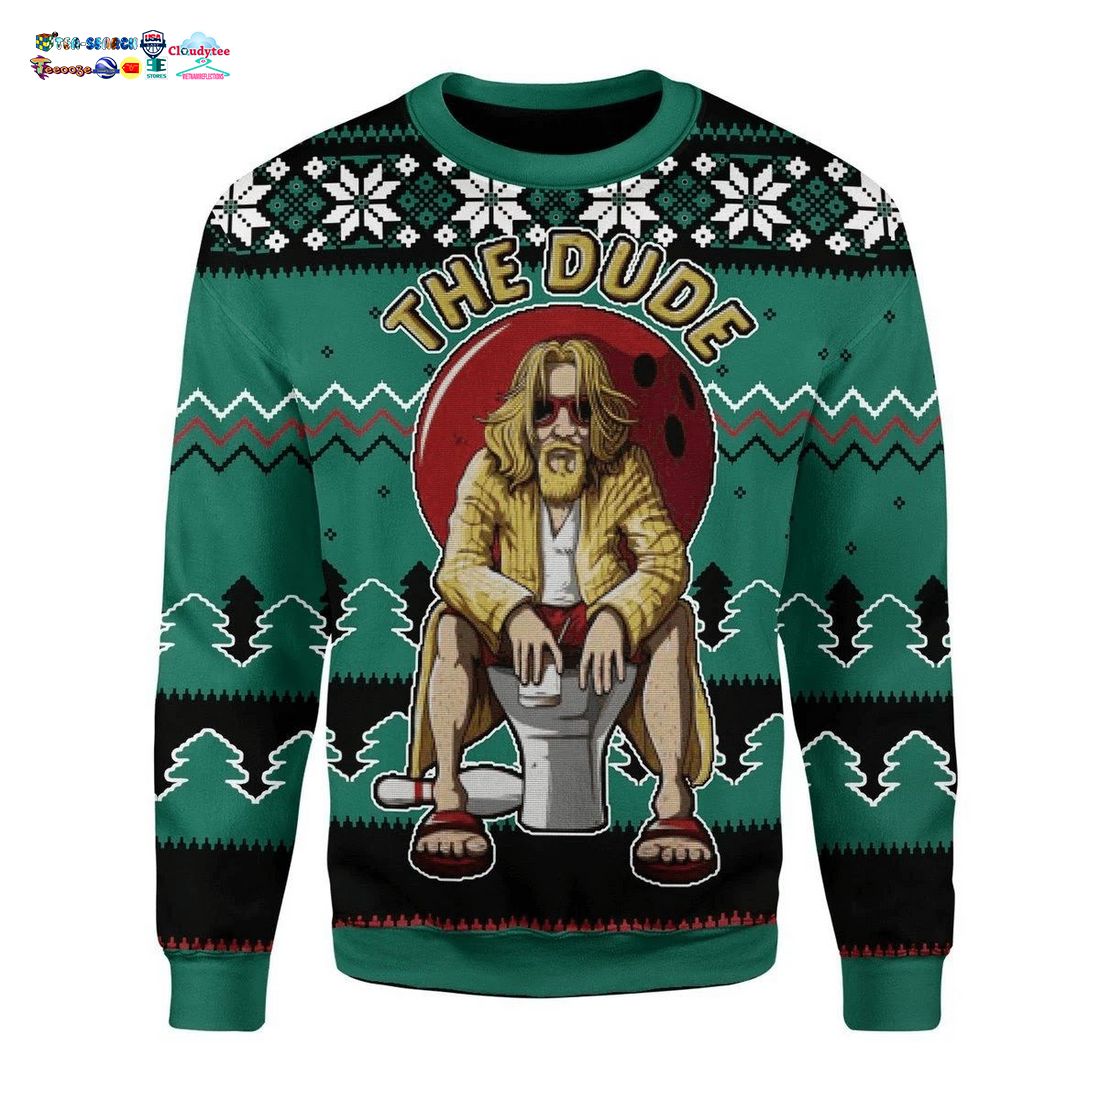 The Dude Ugly Christmas Sweater